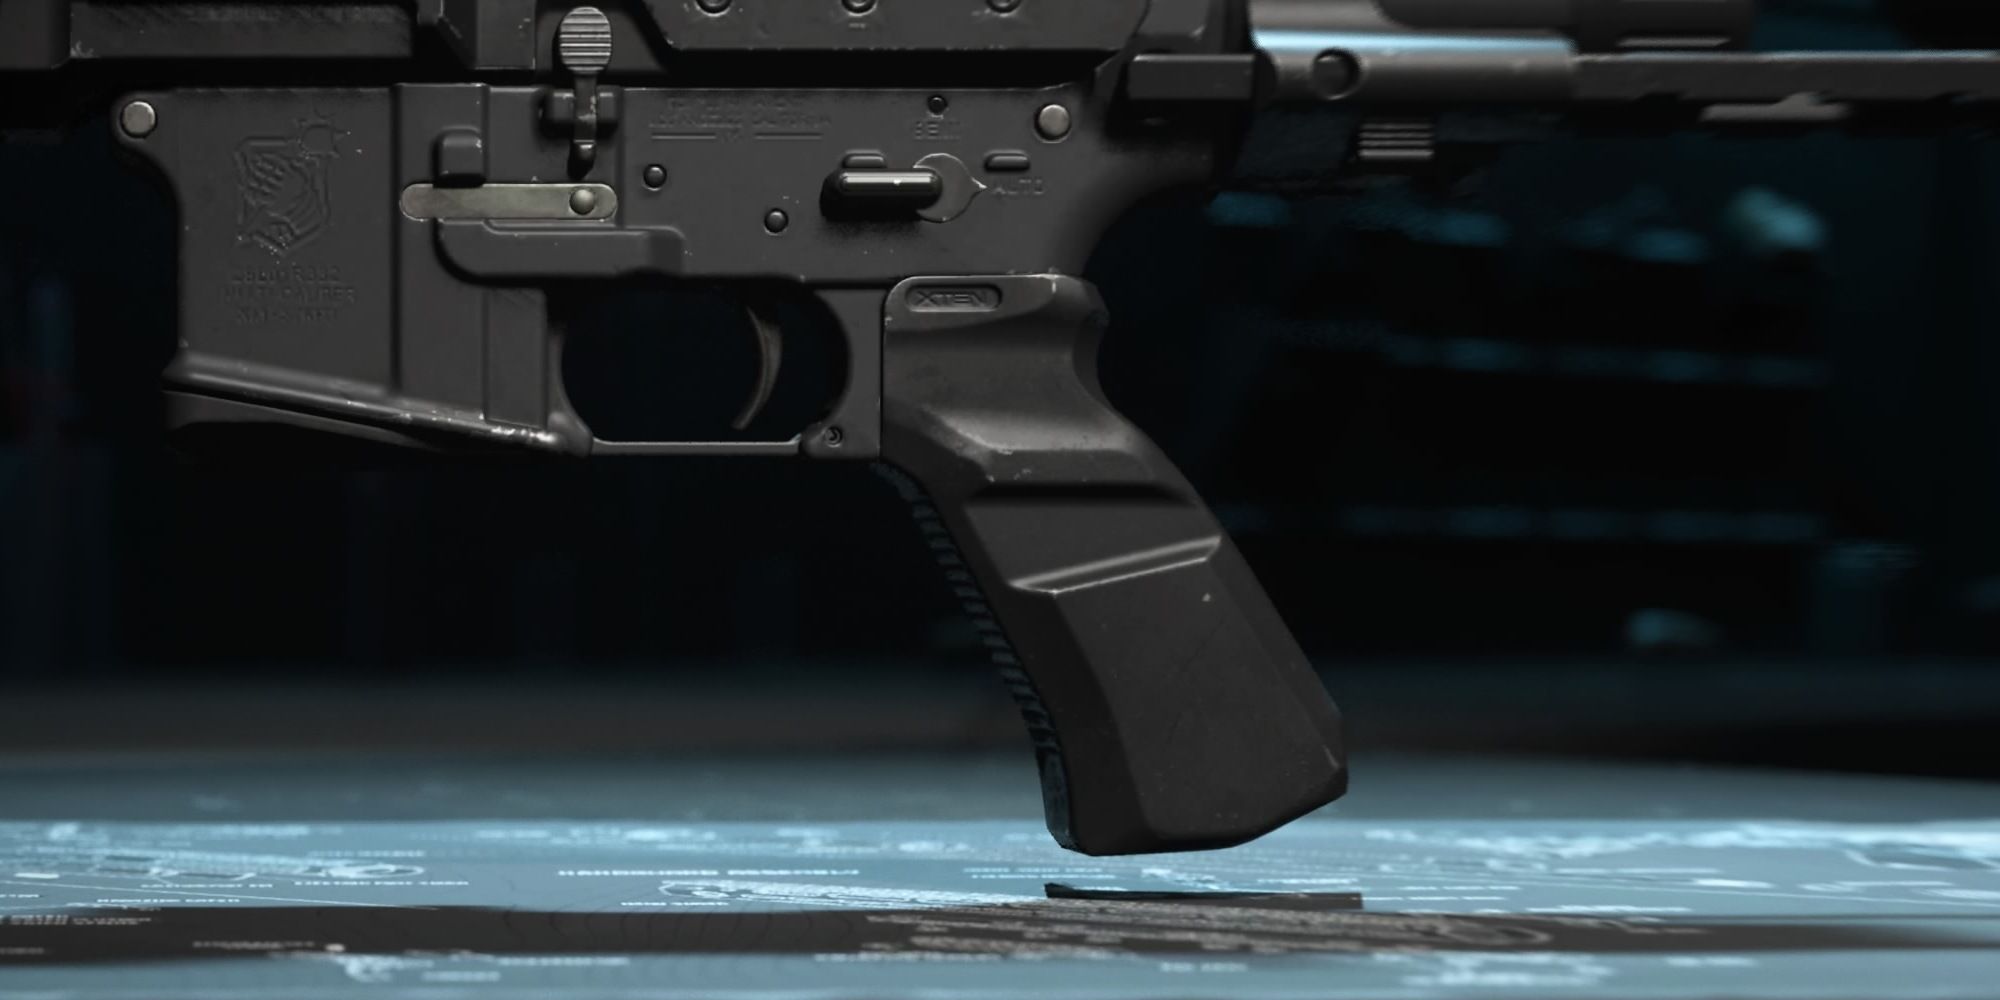 The XTEN grip attaches to the SMG's rear grip slot at COD:MW2.